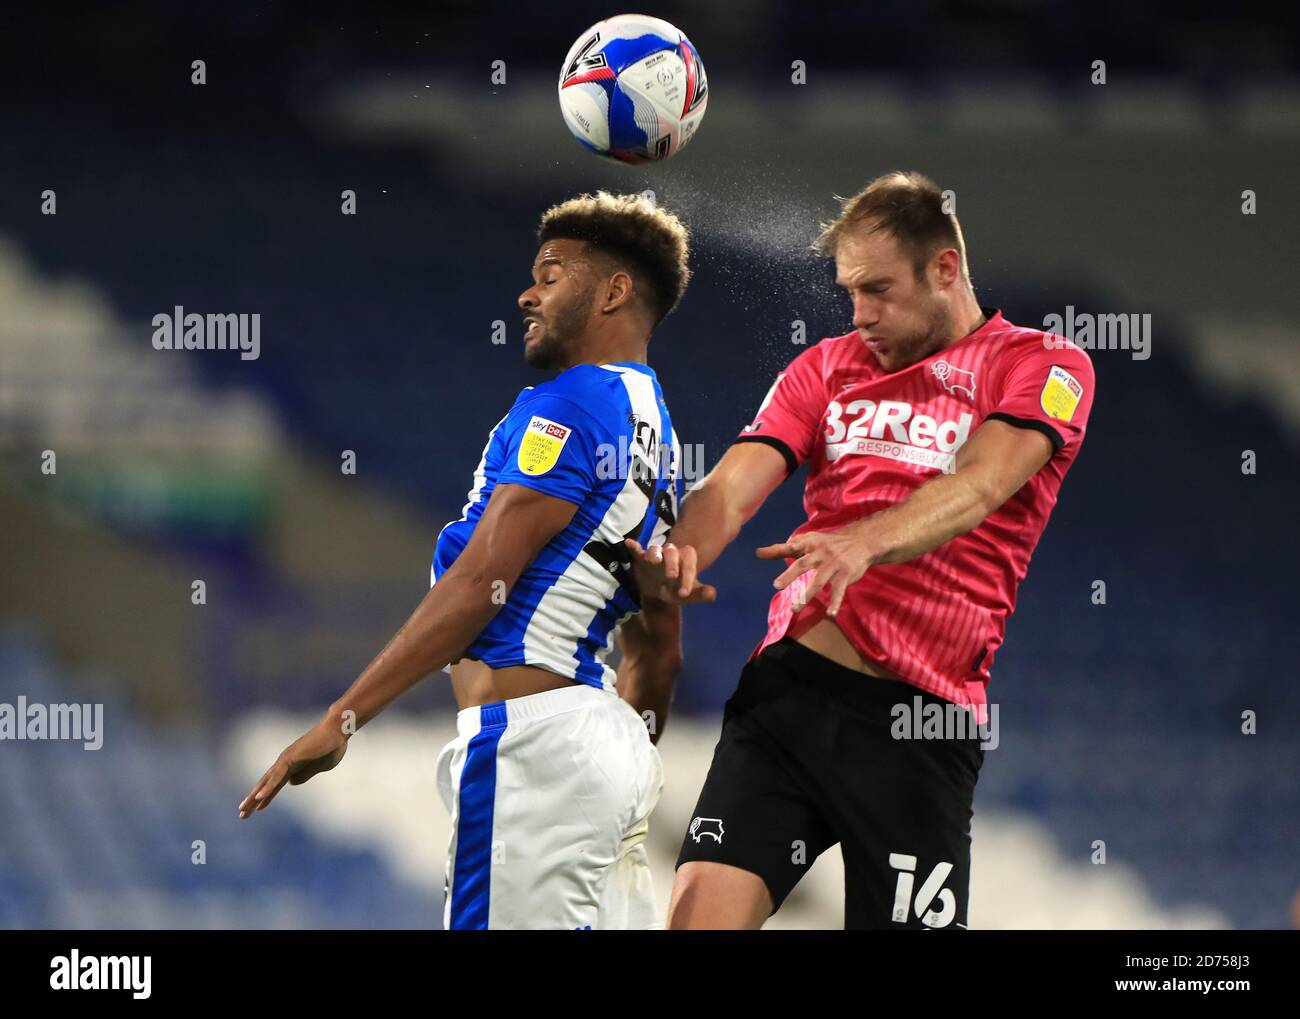 Huddersfield Town's Fraizer Campbell (left) and Derby County's Matt Clarke battle for the ball during the Sky Bet Championship match at The John Smith's Stadium, Huddersfield. Stock Photo